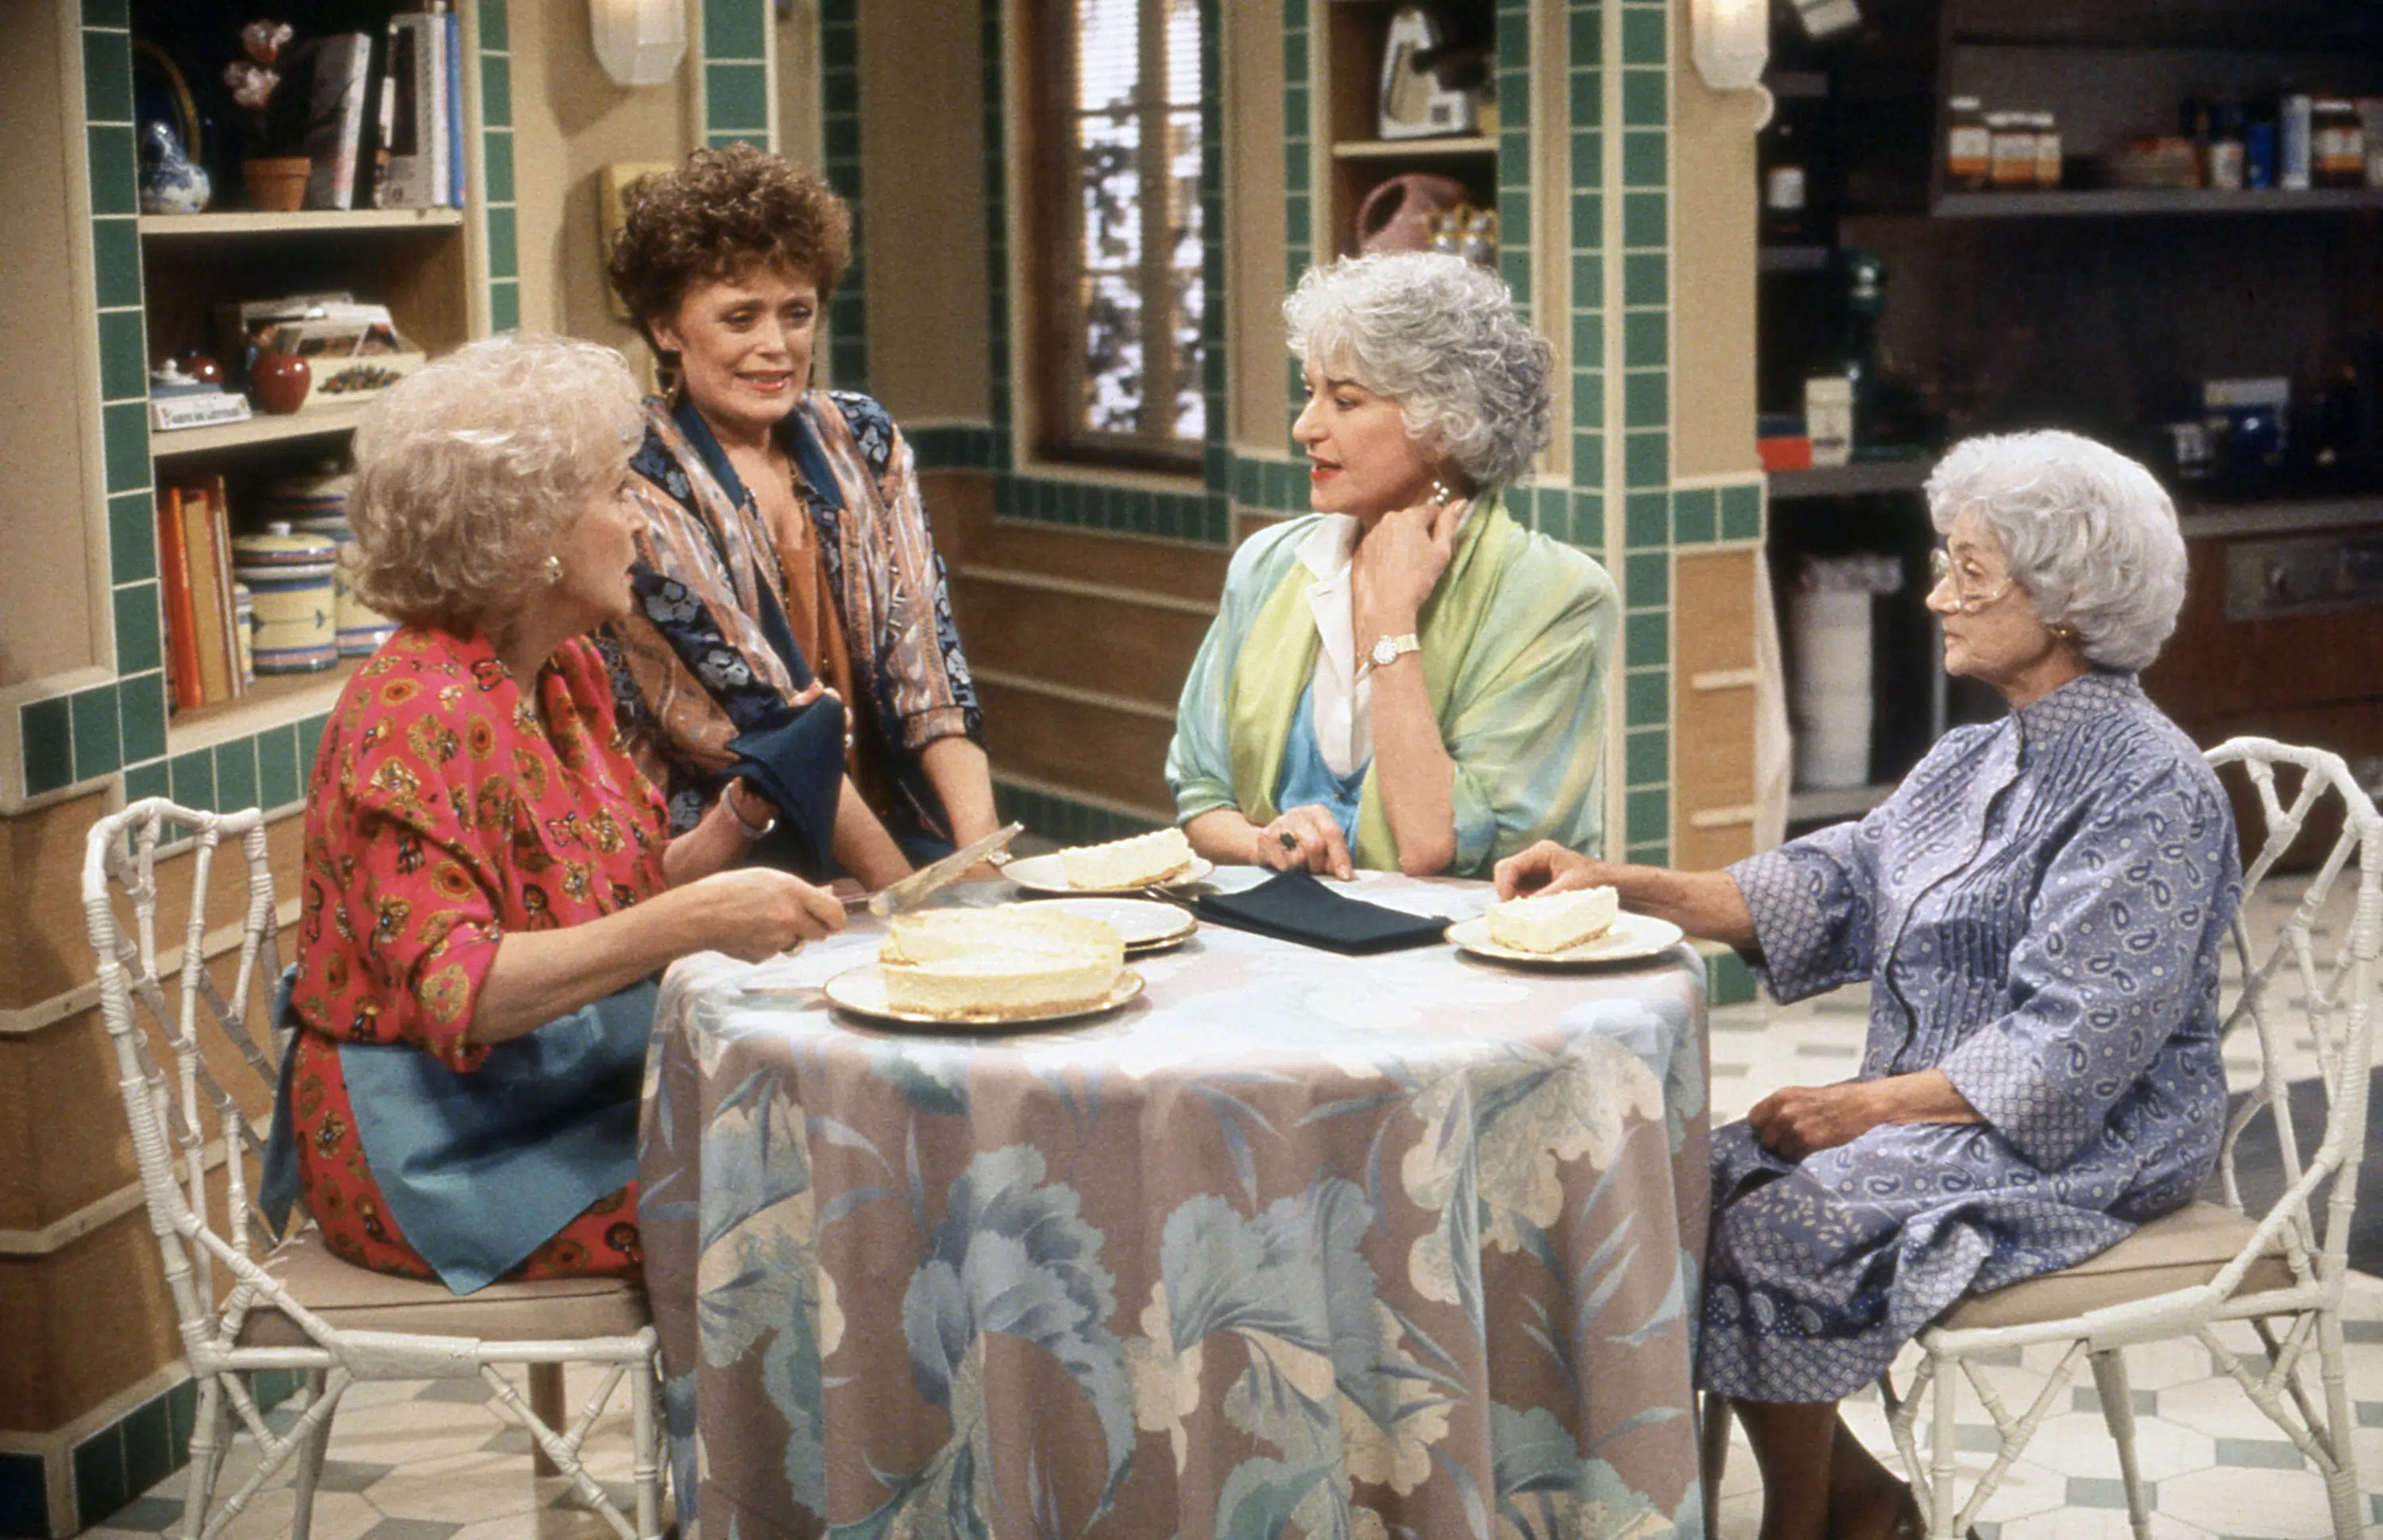 THE GOLDEN PALACE, from left: Betty White, Rue McClanahan, Bea Arthur, Estelle Getty, 'Seems Like Old Times: Part 1 &amp; 2'